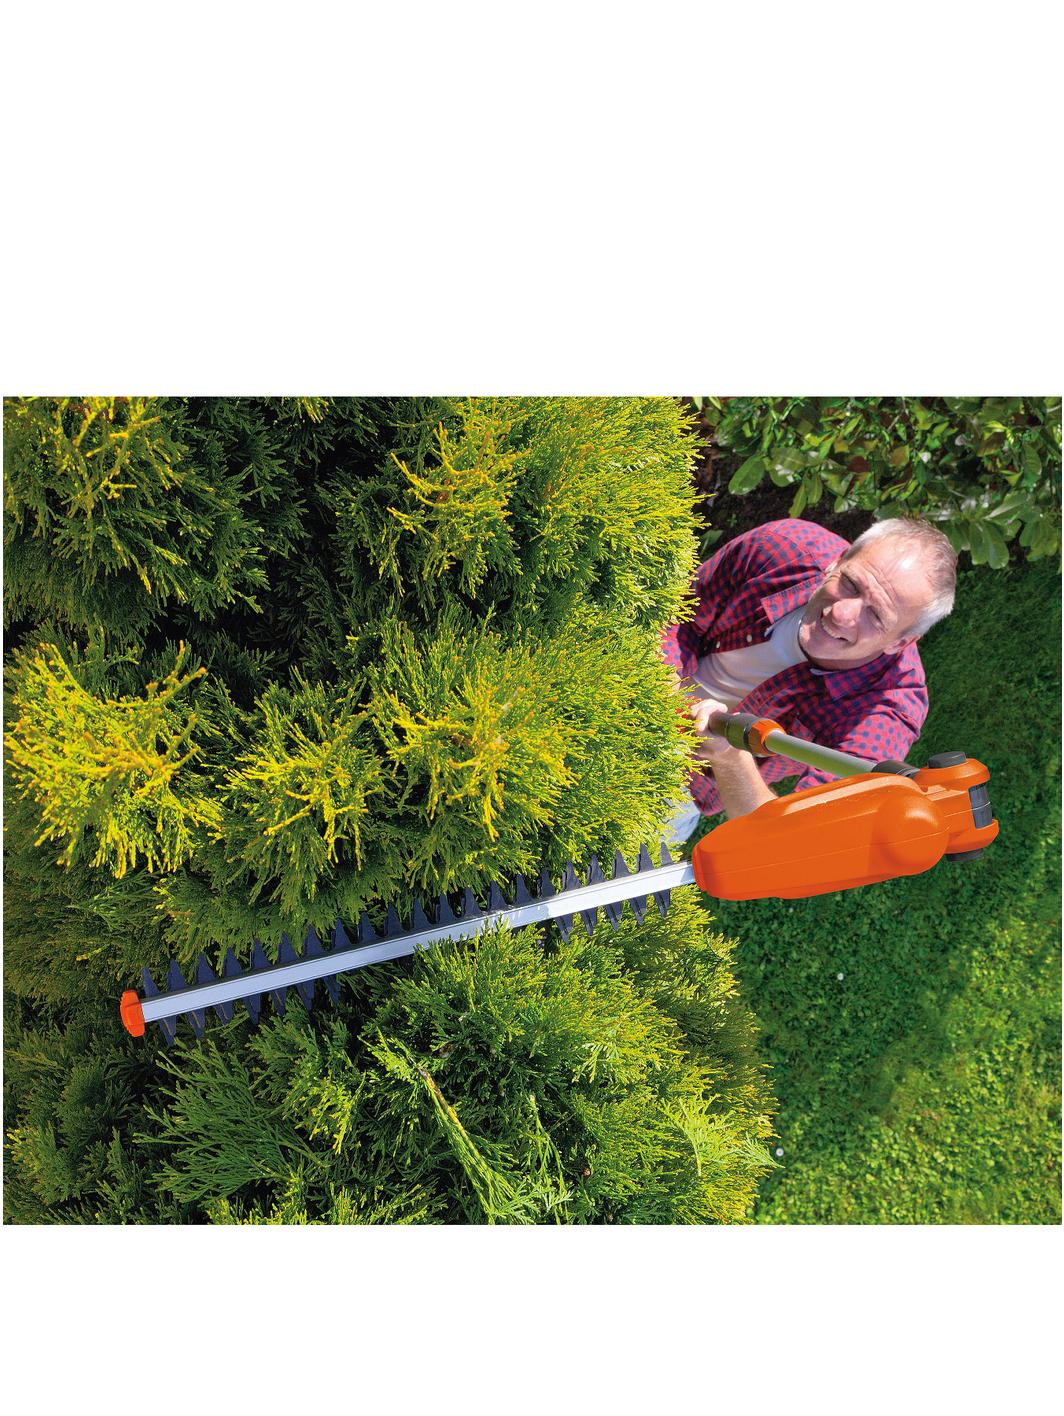 flymo cordless hedge trimmer